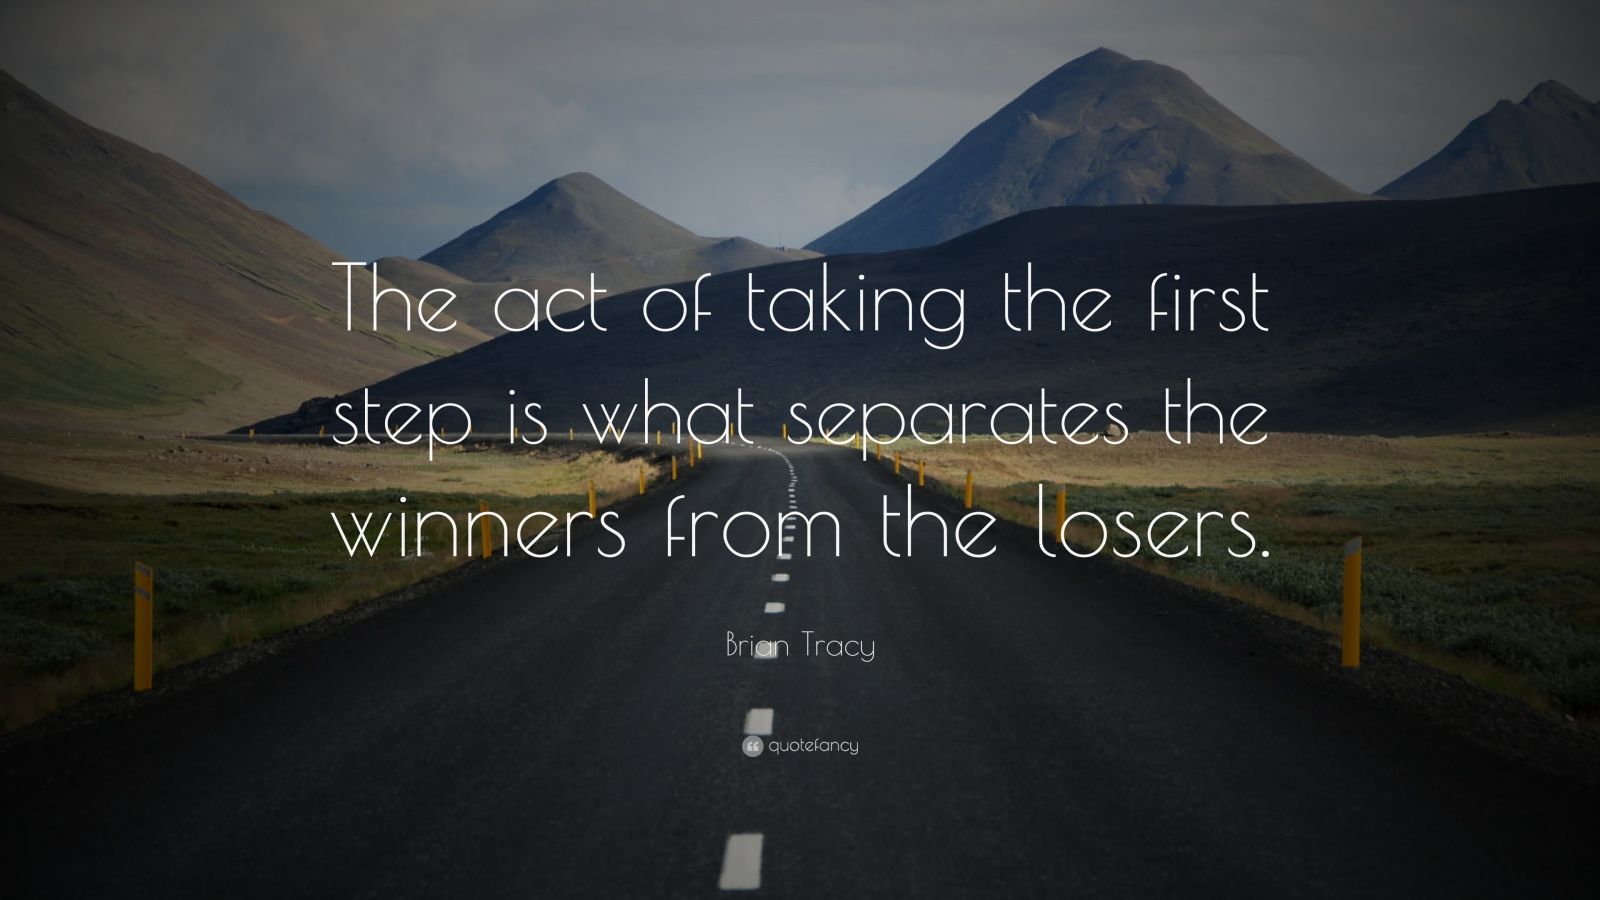 Brian Tracy Quote: "The act of taking the first step is ...